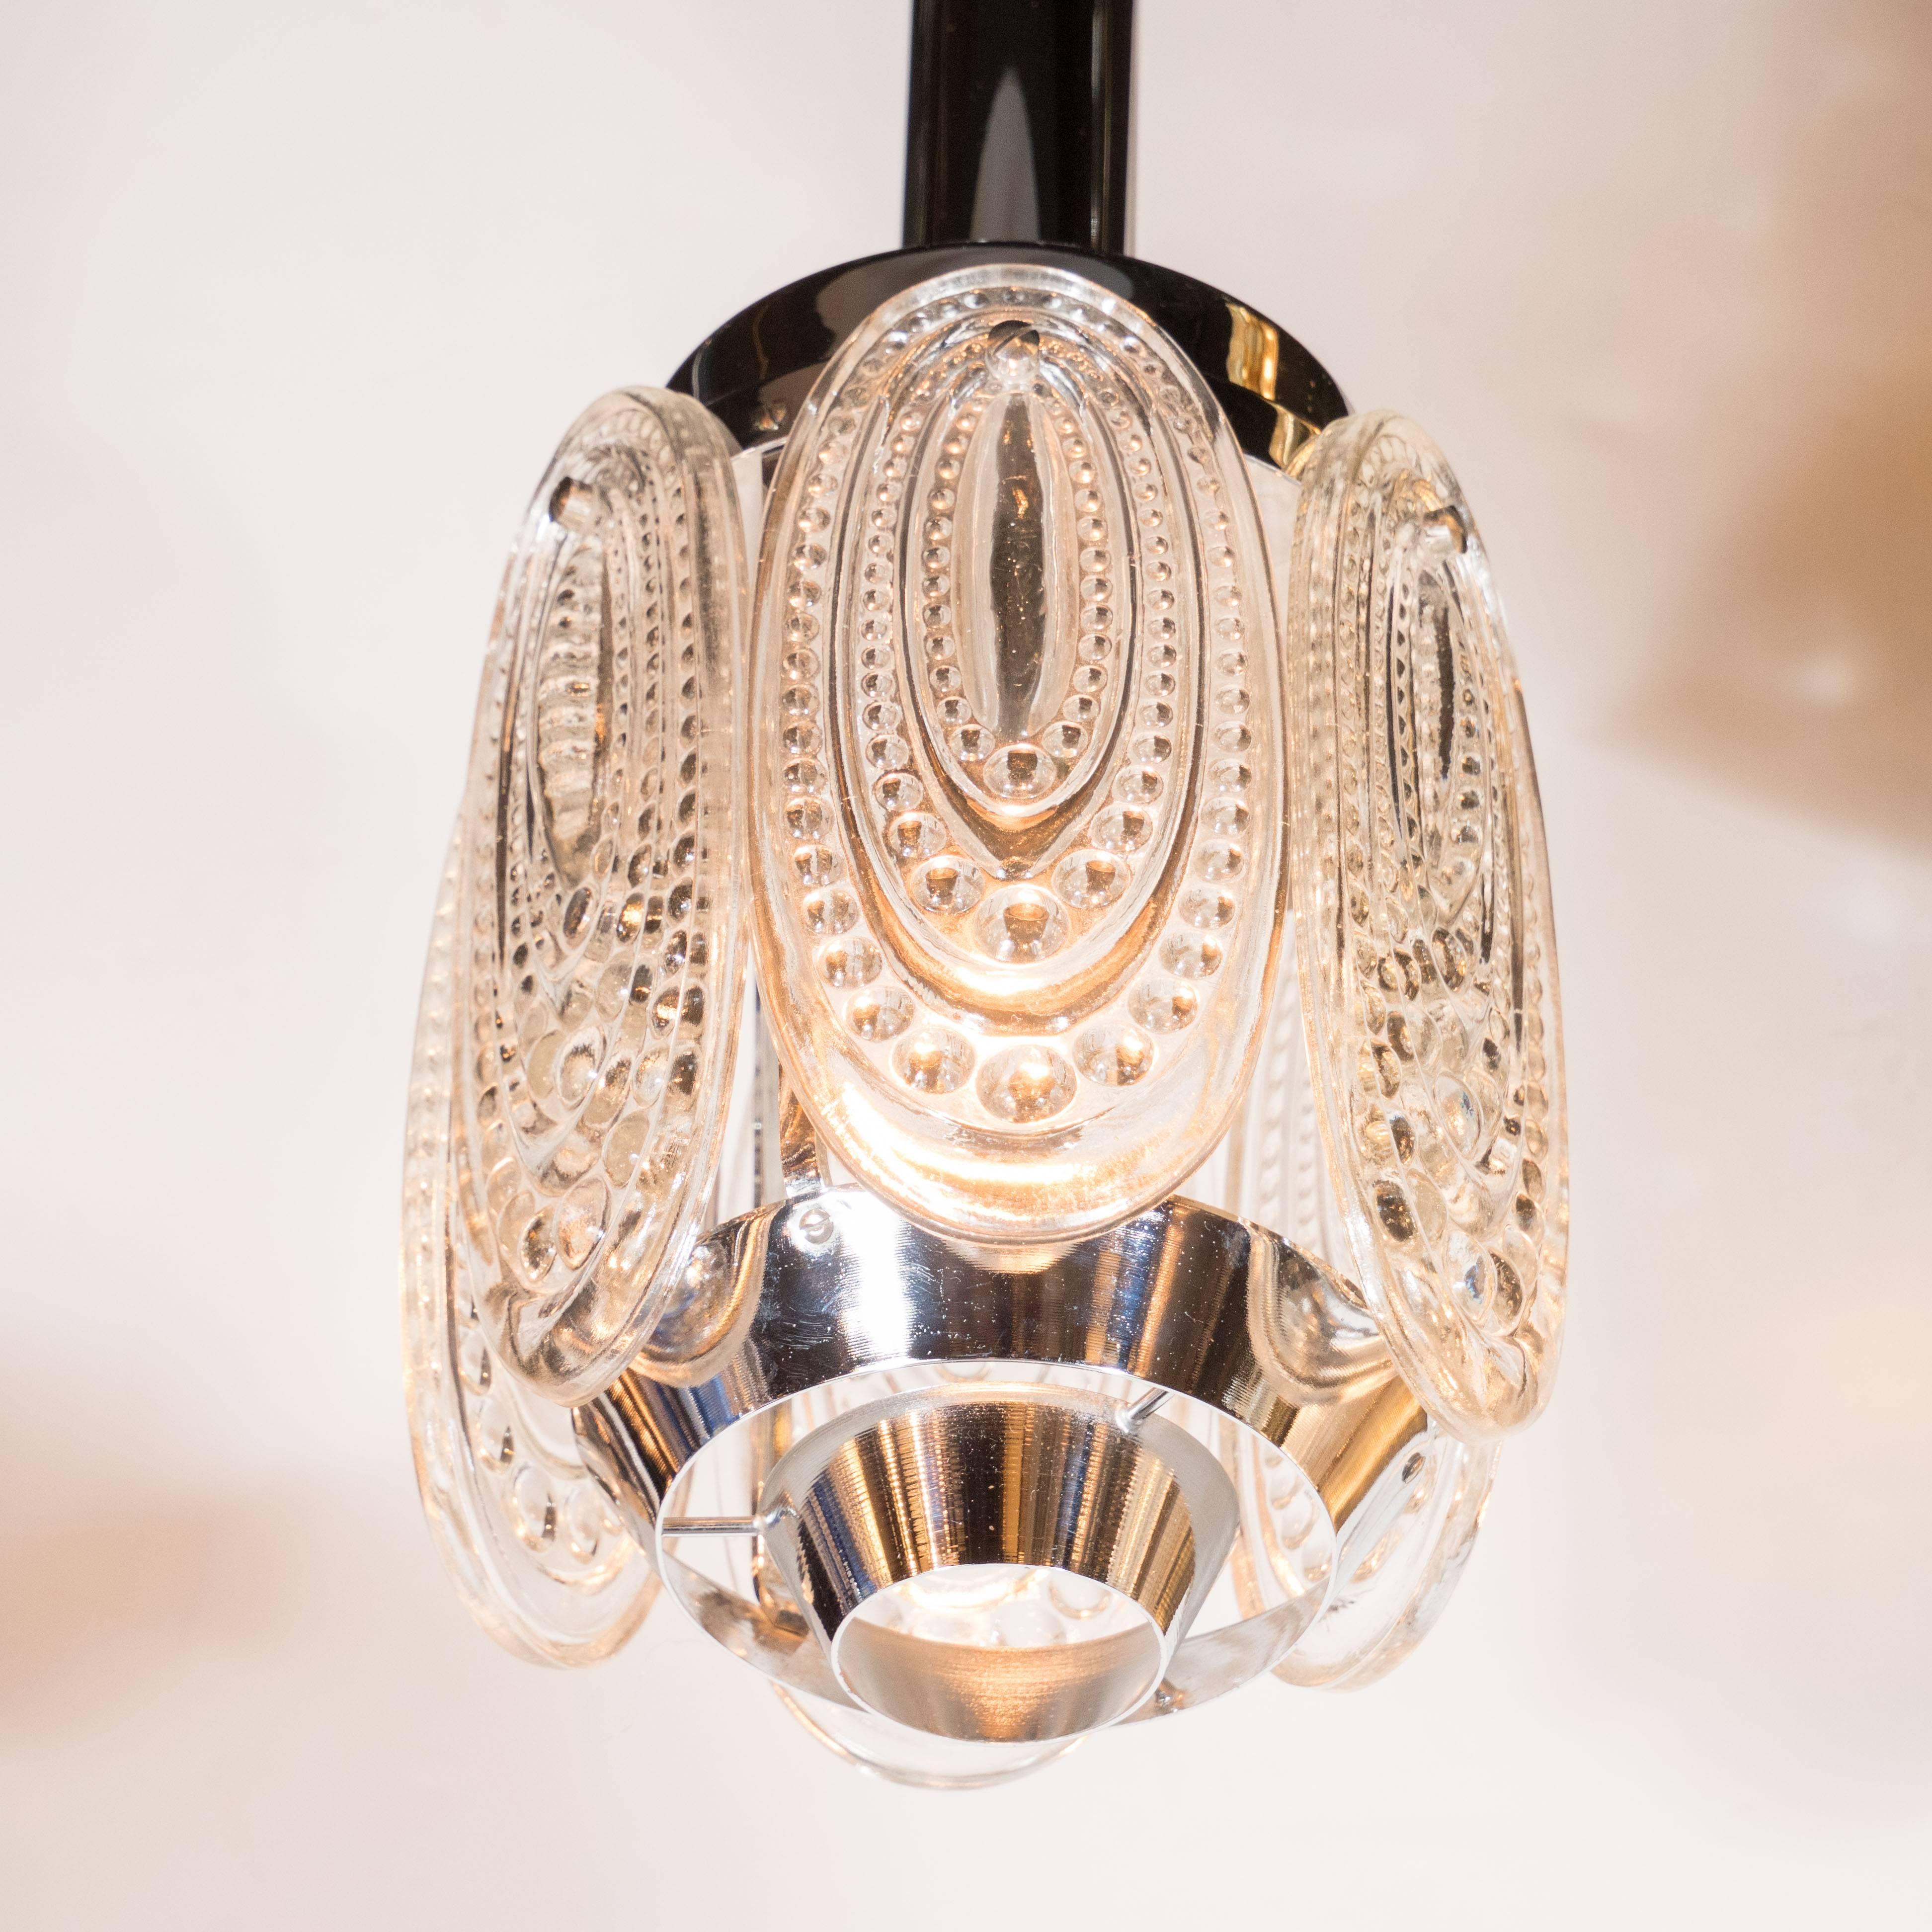 Polished Mid-Century Modernist Pendant in Nickel with Patterned Pressed Glass Oval Discs